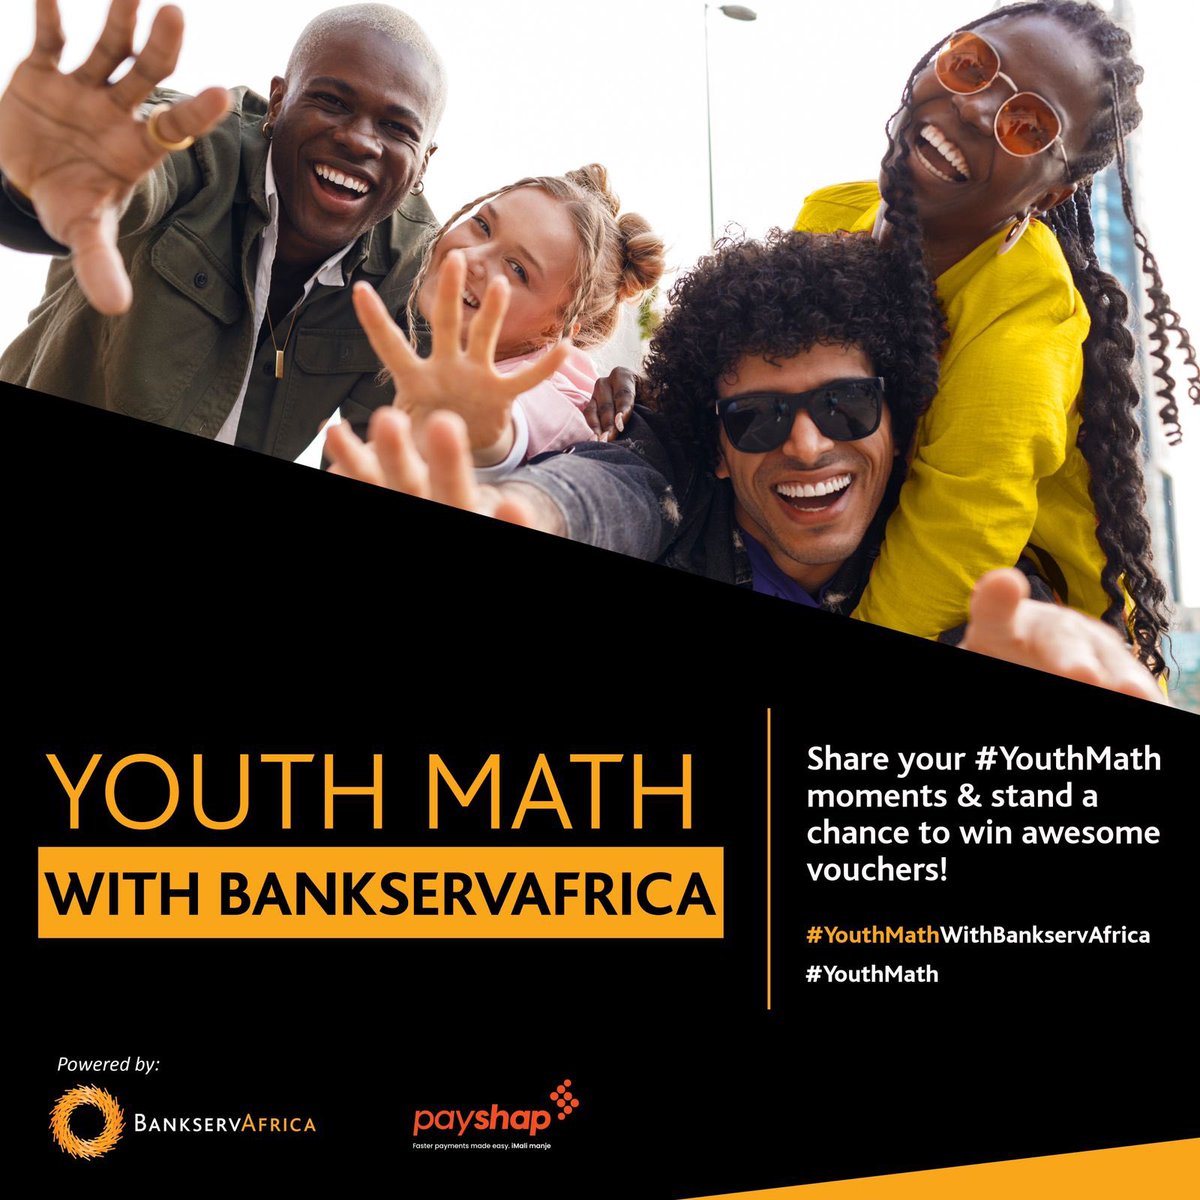 🔌Plug young peeps, we’ve heard your #YouthMath loud and clear, fam! Now, it's time to level up our financial game together! Join our webinars where we'll tackle each of your burning money dilemmas head-on. Plus, stand a chance to snag some sweet vouchers along the way! Ready to